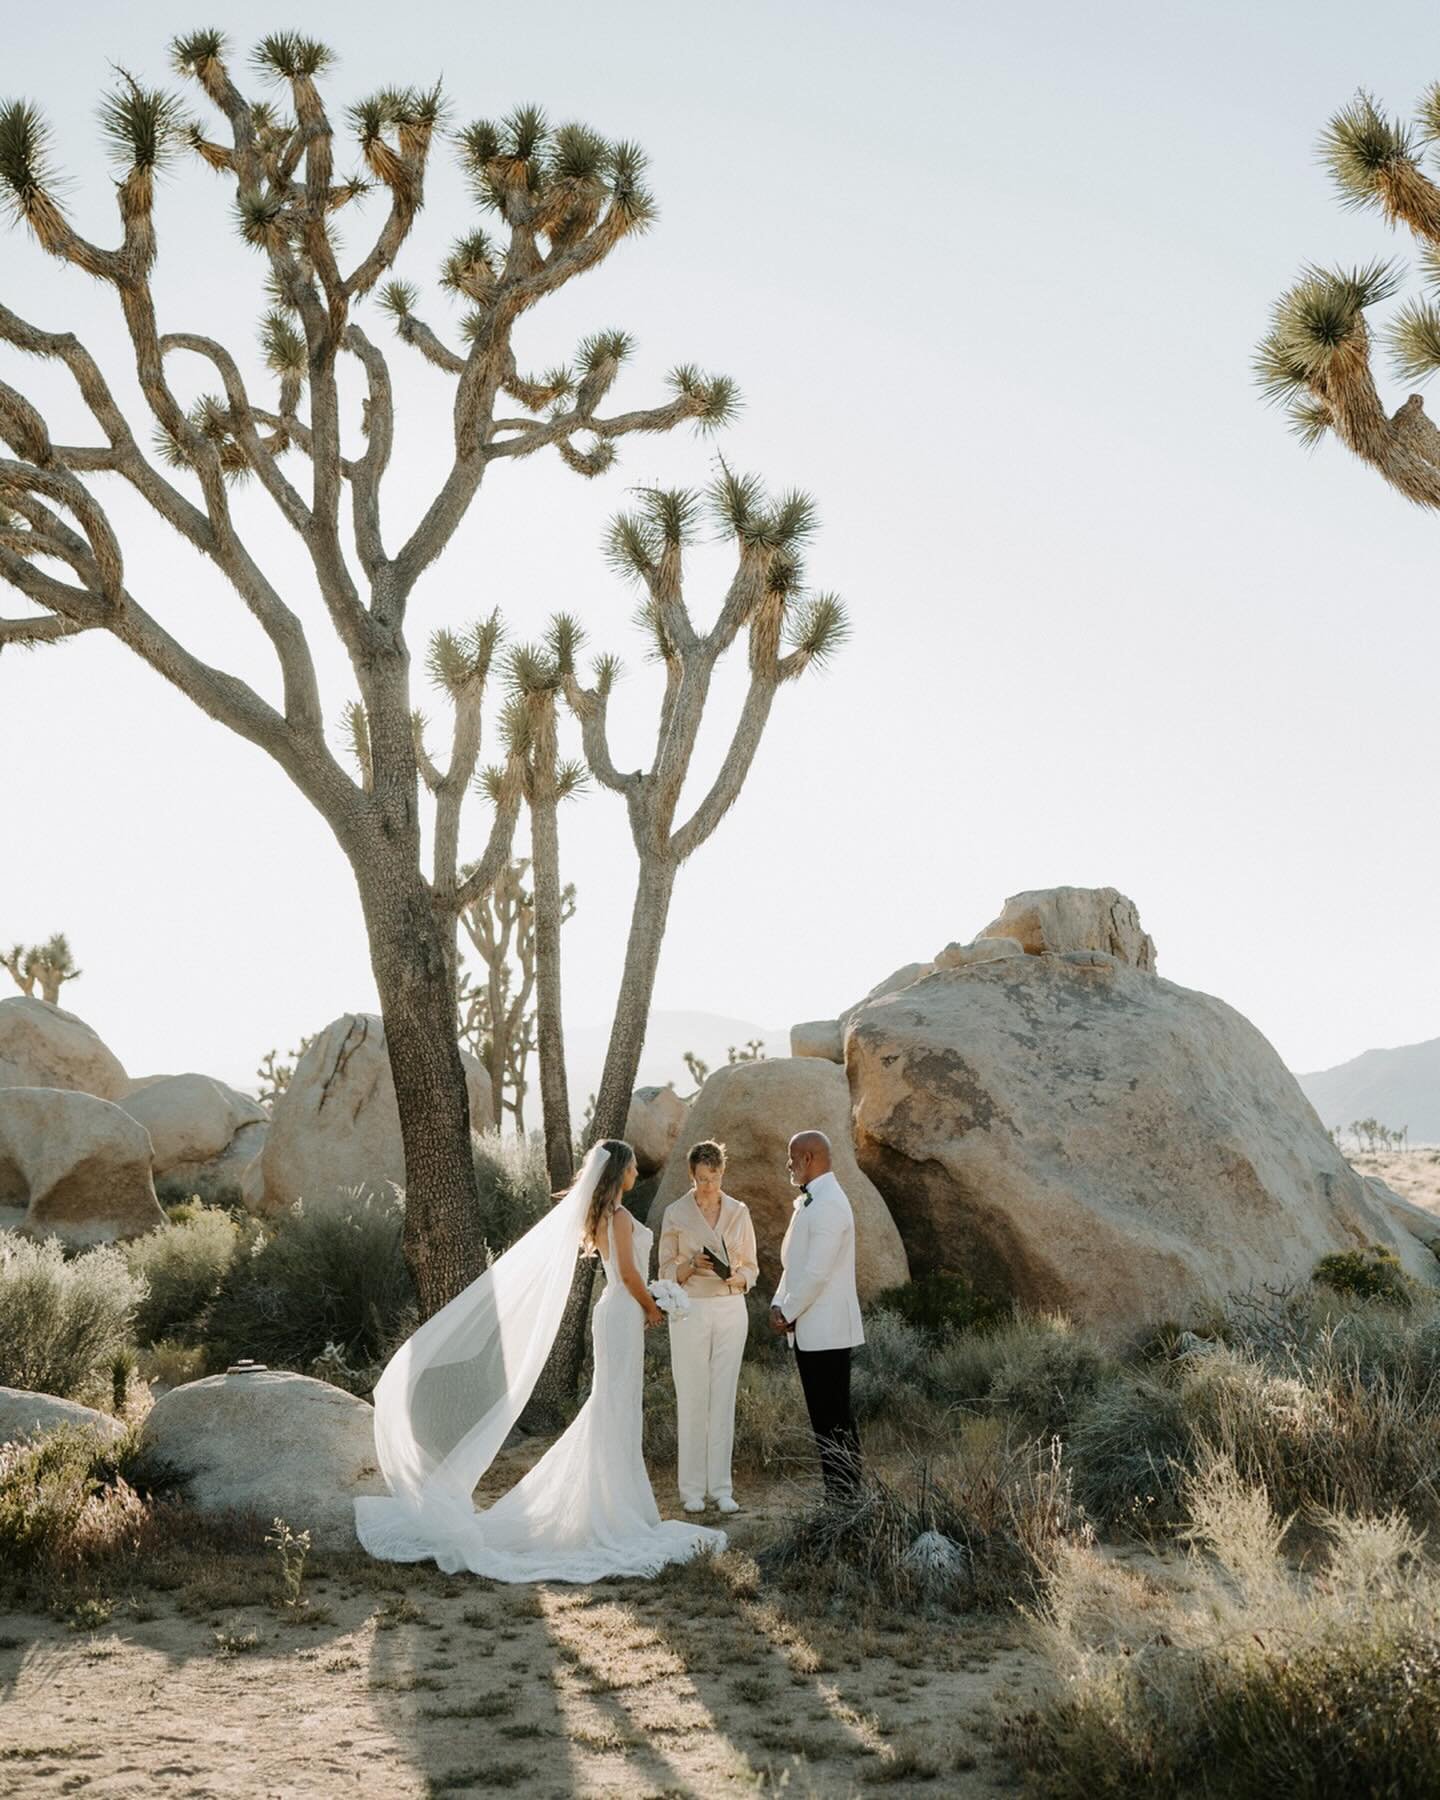 I am 1000000% obsessed with this Joshua Tree elopement. It was perfect, intimate, SO fun and now they are marrrrried!!!

The team:
Planning: @carrie_thewedyplanner @wedy.app 
Officiant: @weddinginthedesert 
Hair and makeup: @deserthoneyartistry 
Cake